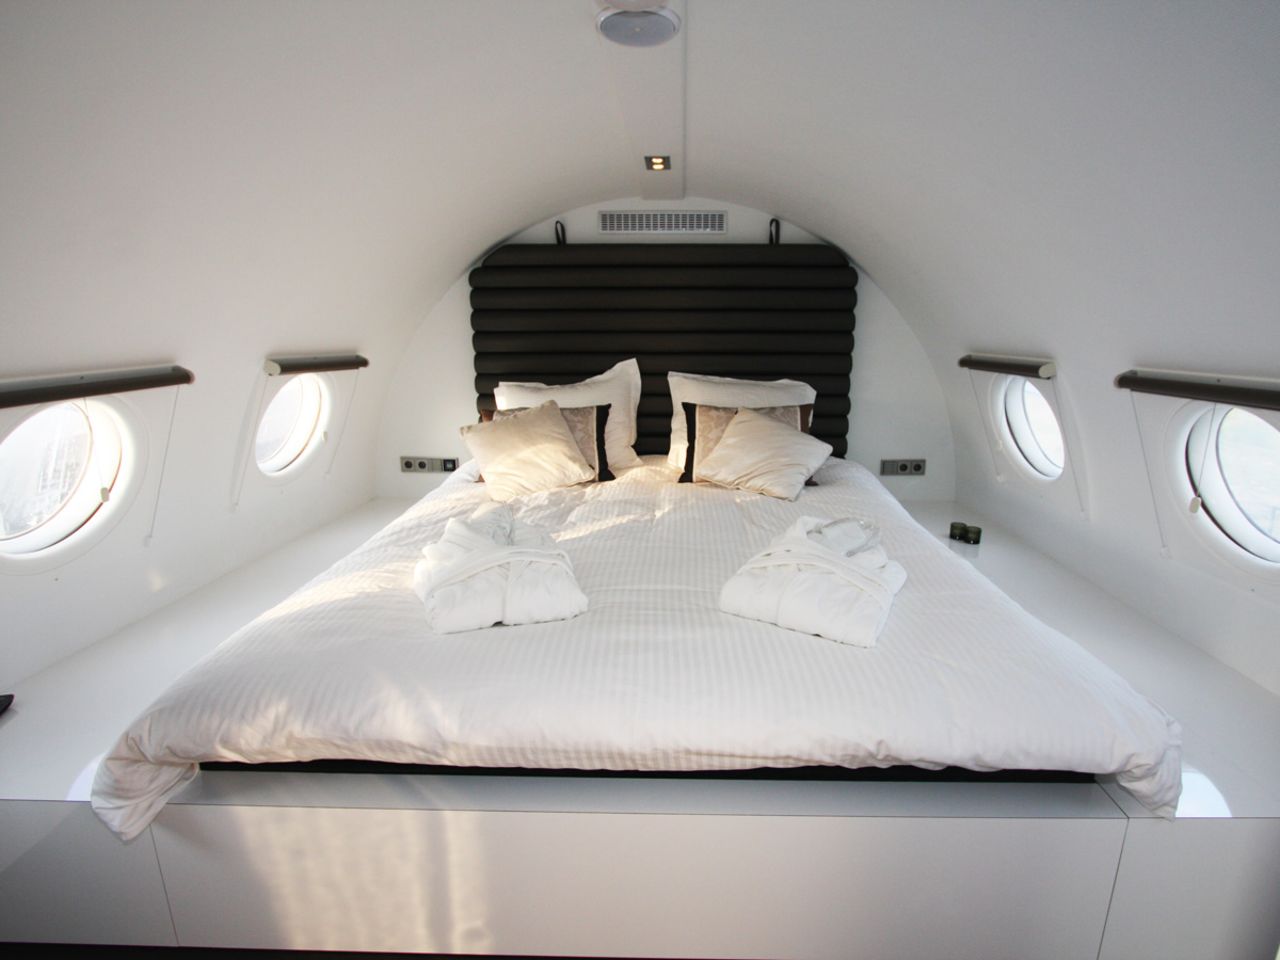 The Hotel Suite is equipped with this bed, a Jacuzzi, infrared sauna and mini-bar. It's a plane of many lives: it started out as a political transport, was converted to a commercial airplane seating 120, then used as a restaurant for 15 years until it became a hotel in 2007. 